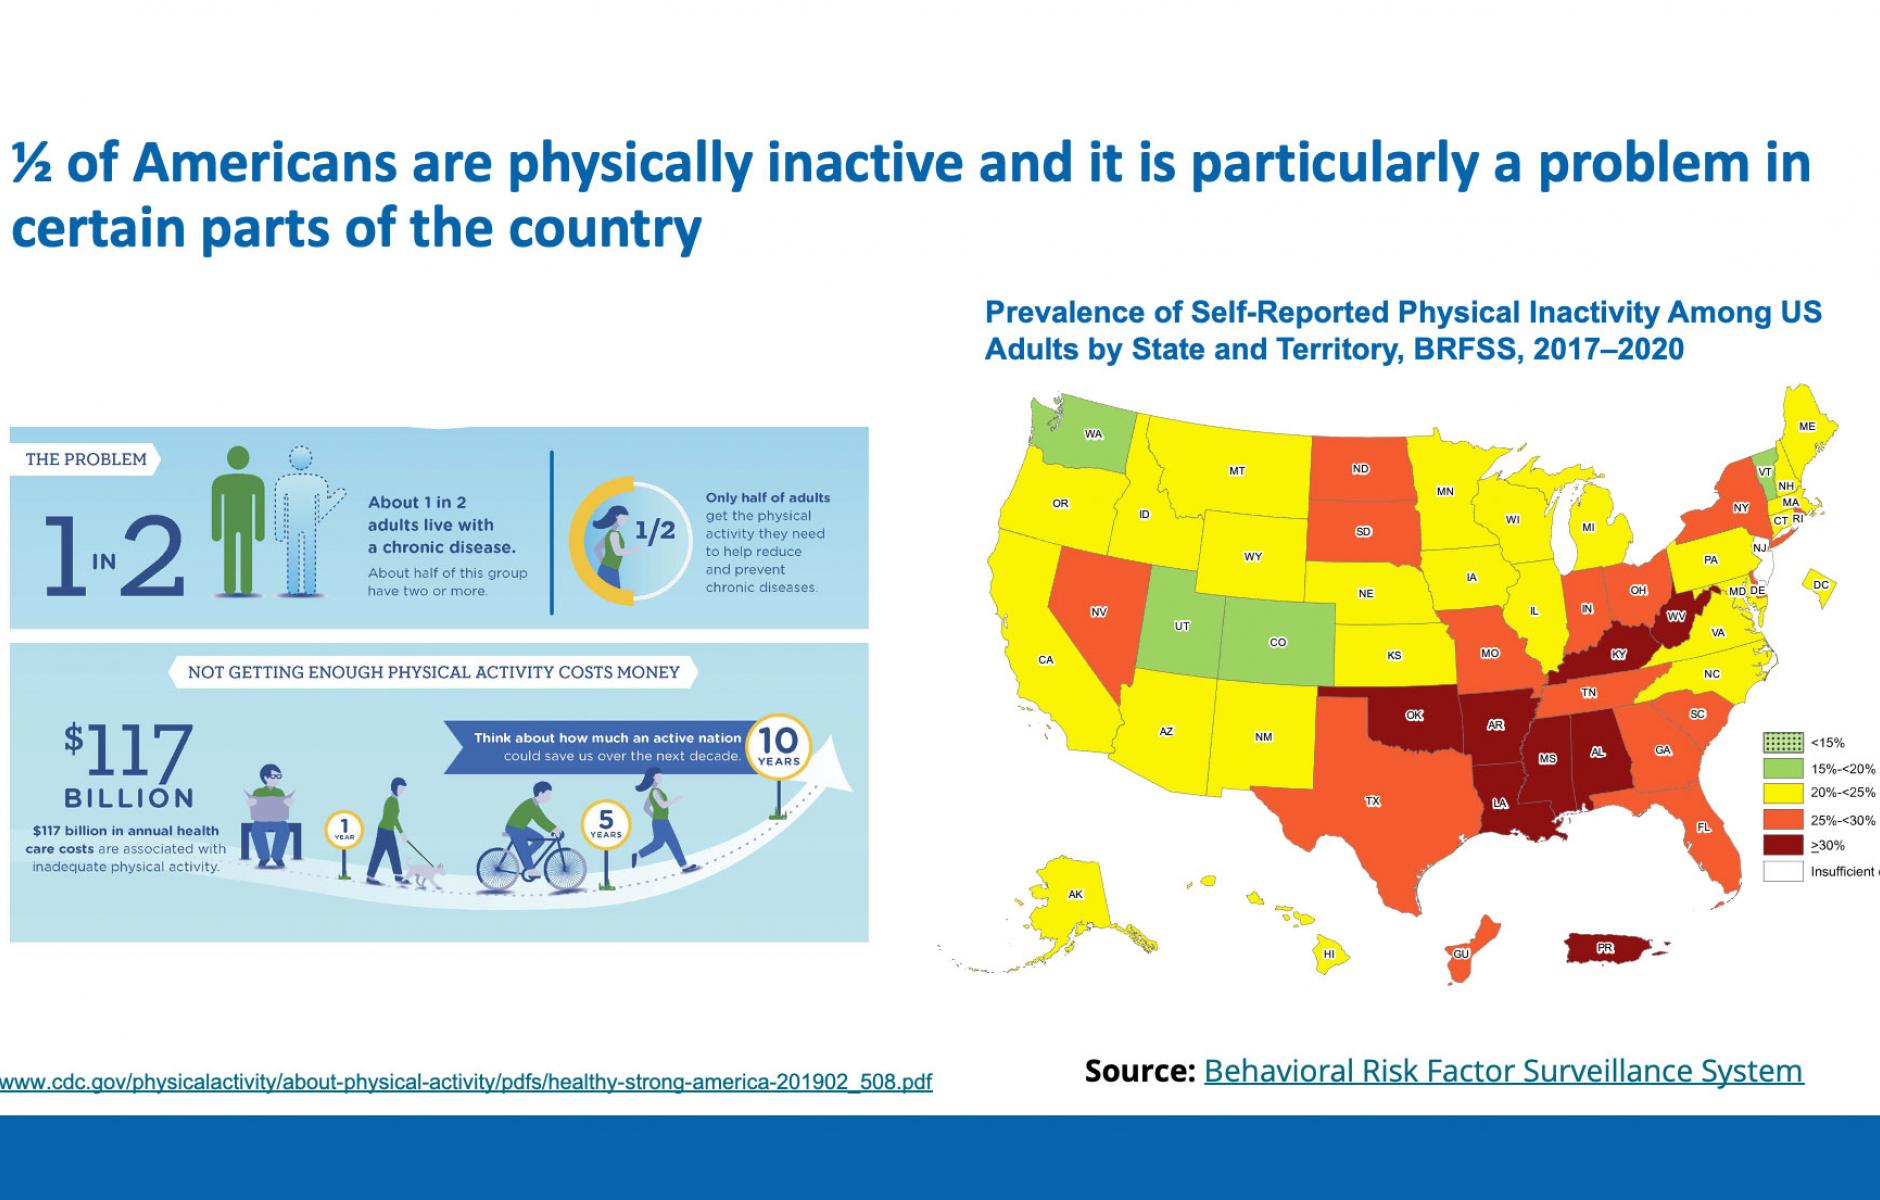 Image: 1/2 of Americans are physically inactive.